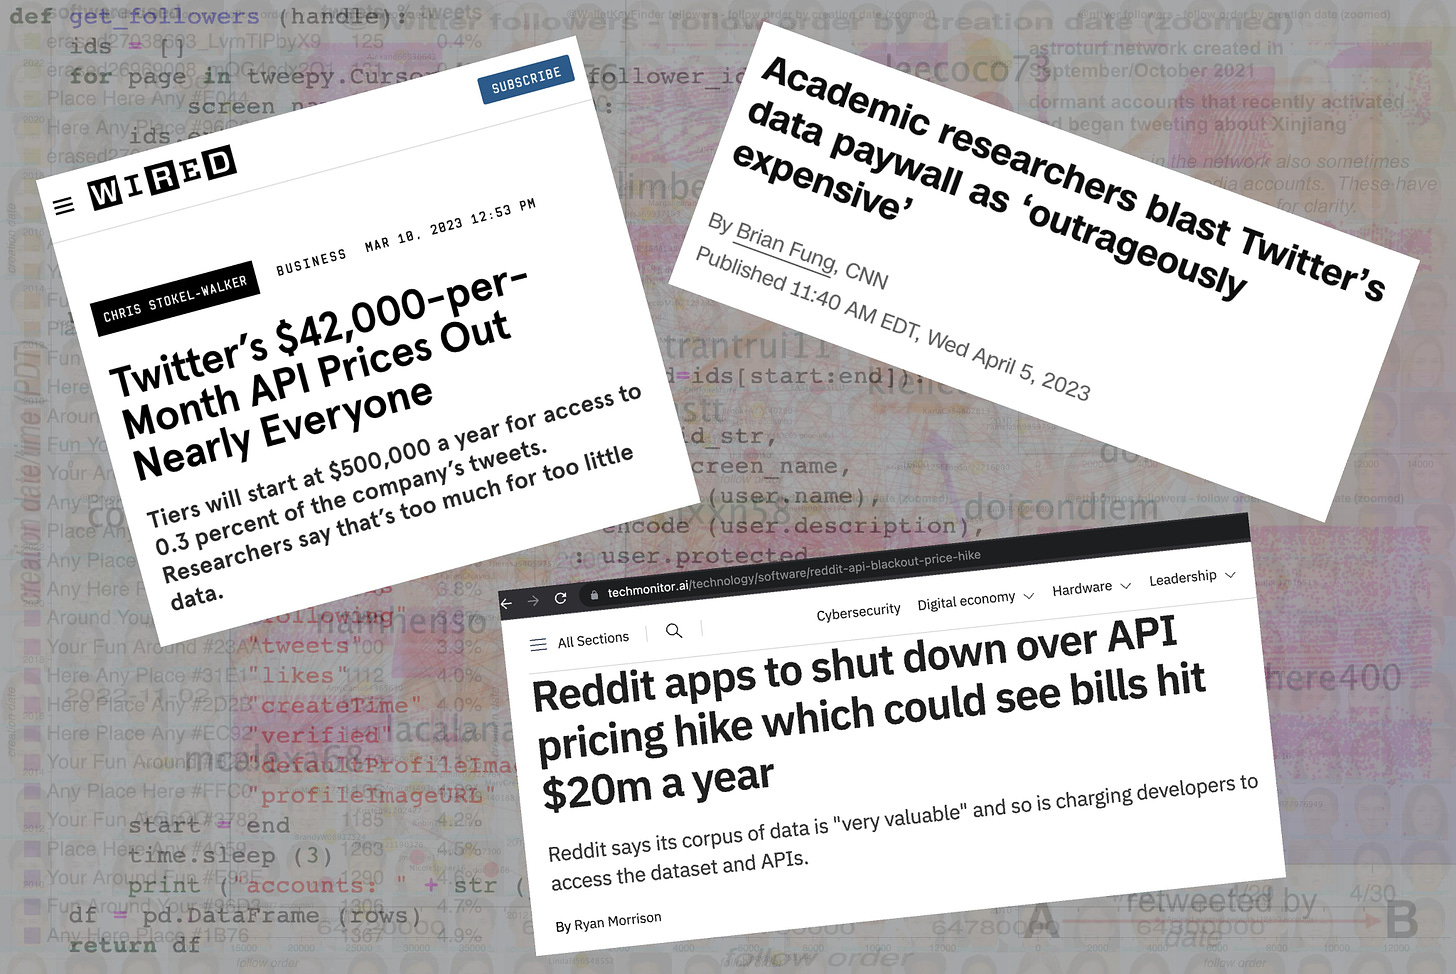 graphic showing screenshots of articles about API shutdowns in front of a background of data visualizations produced with the aid of the now-defunct legacy Twitter API